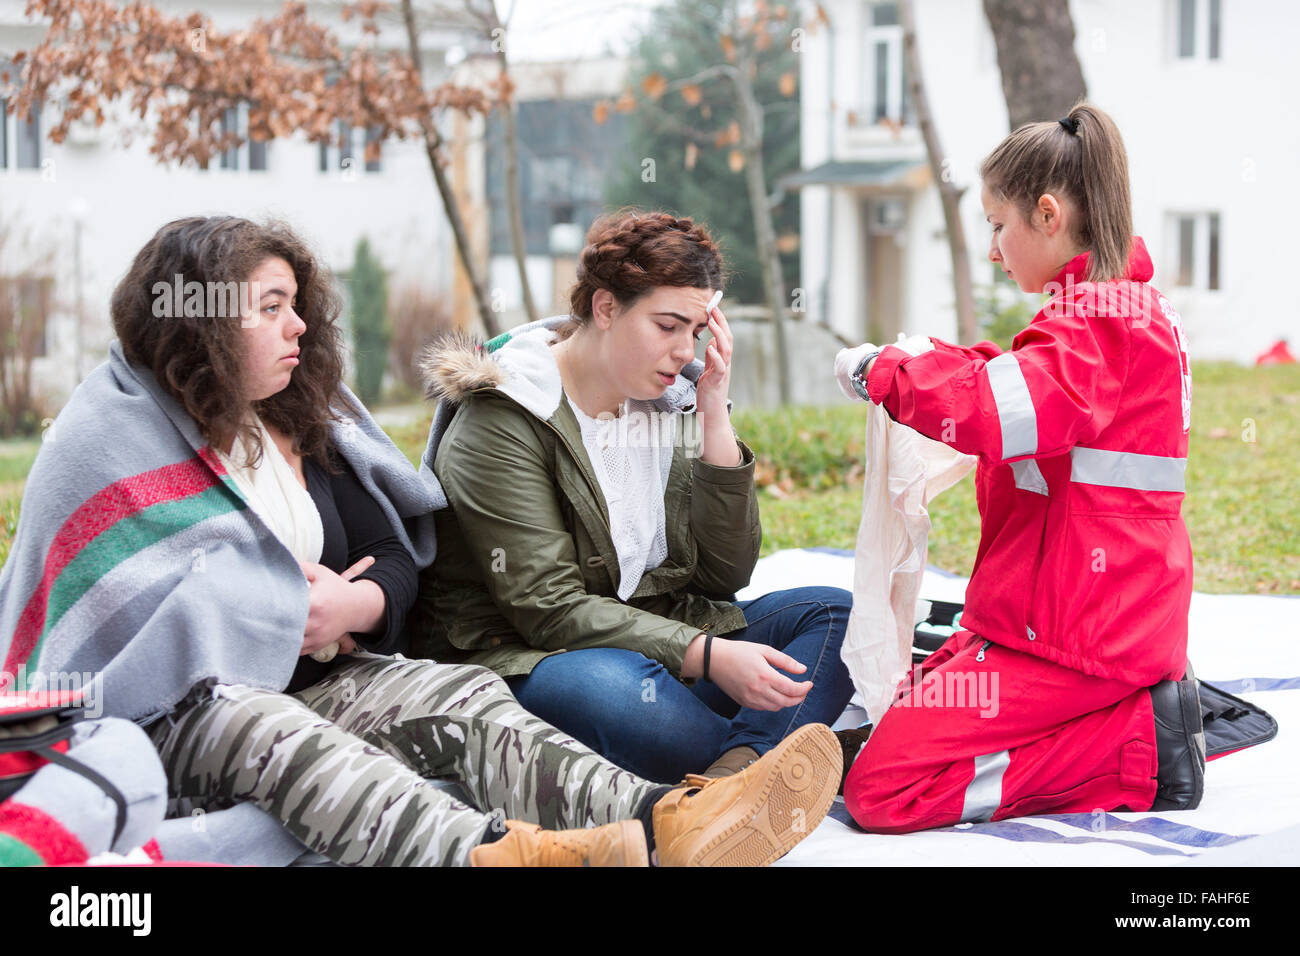 Sofia, Bulgaria - December 5, 2015: Volunteers from the Bulgarian Red Cross Youth Organization are participating in a training o Stock Photo